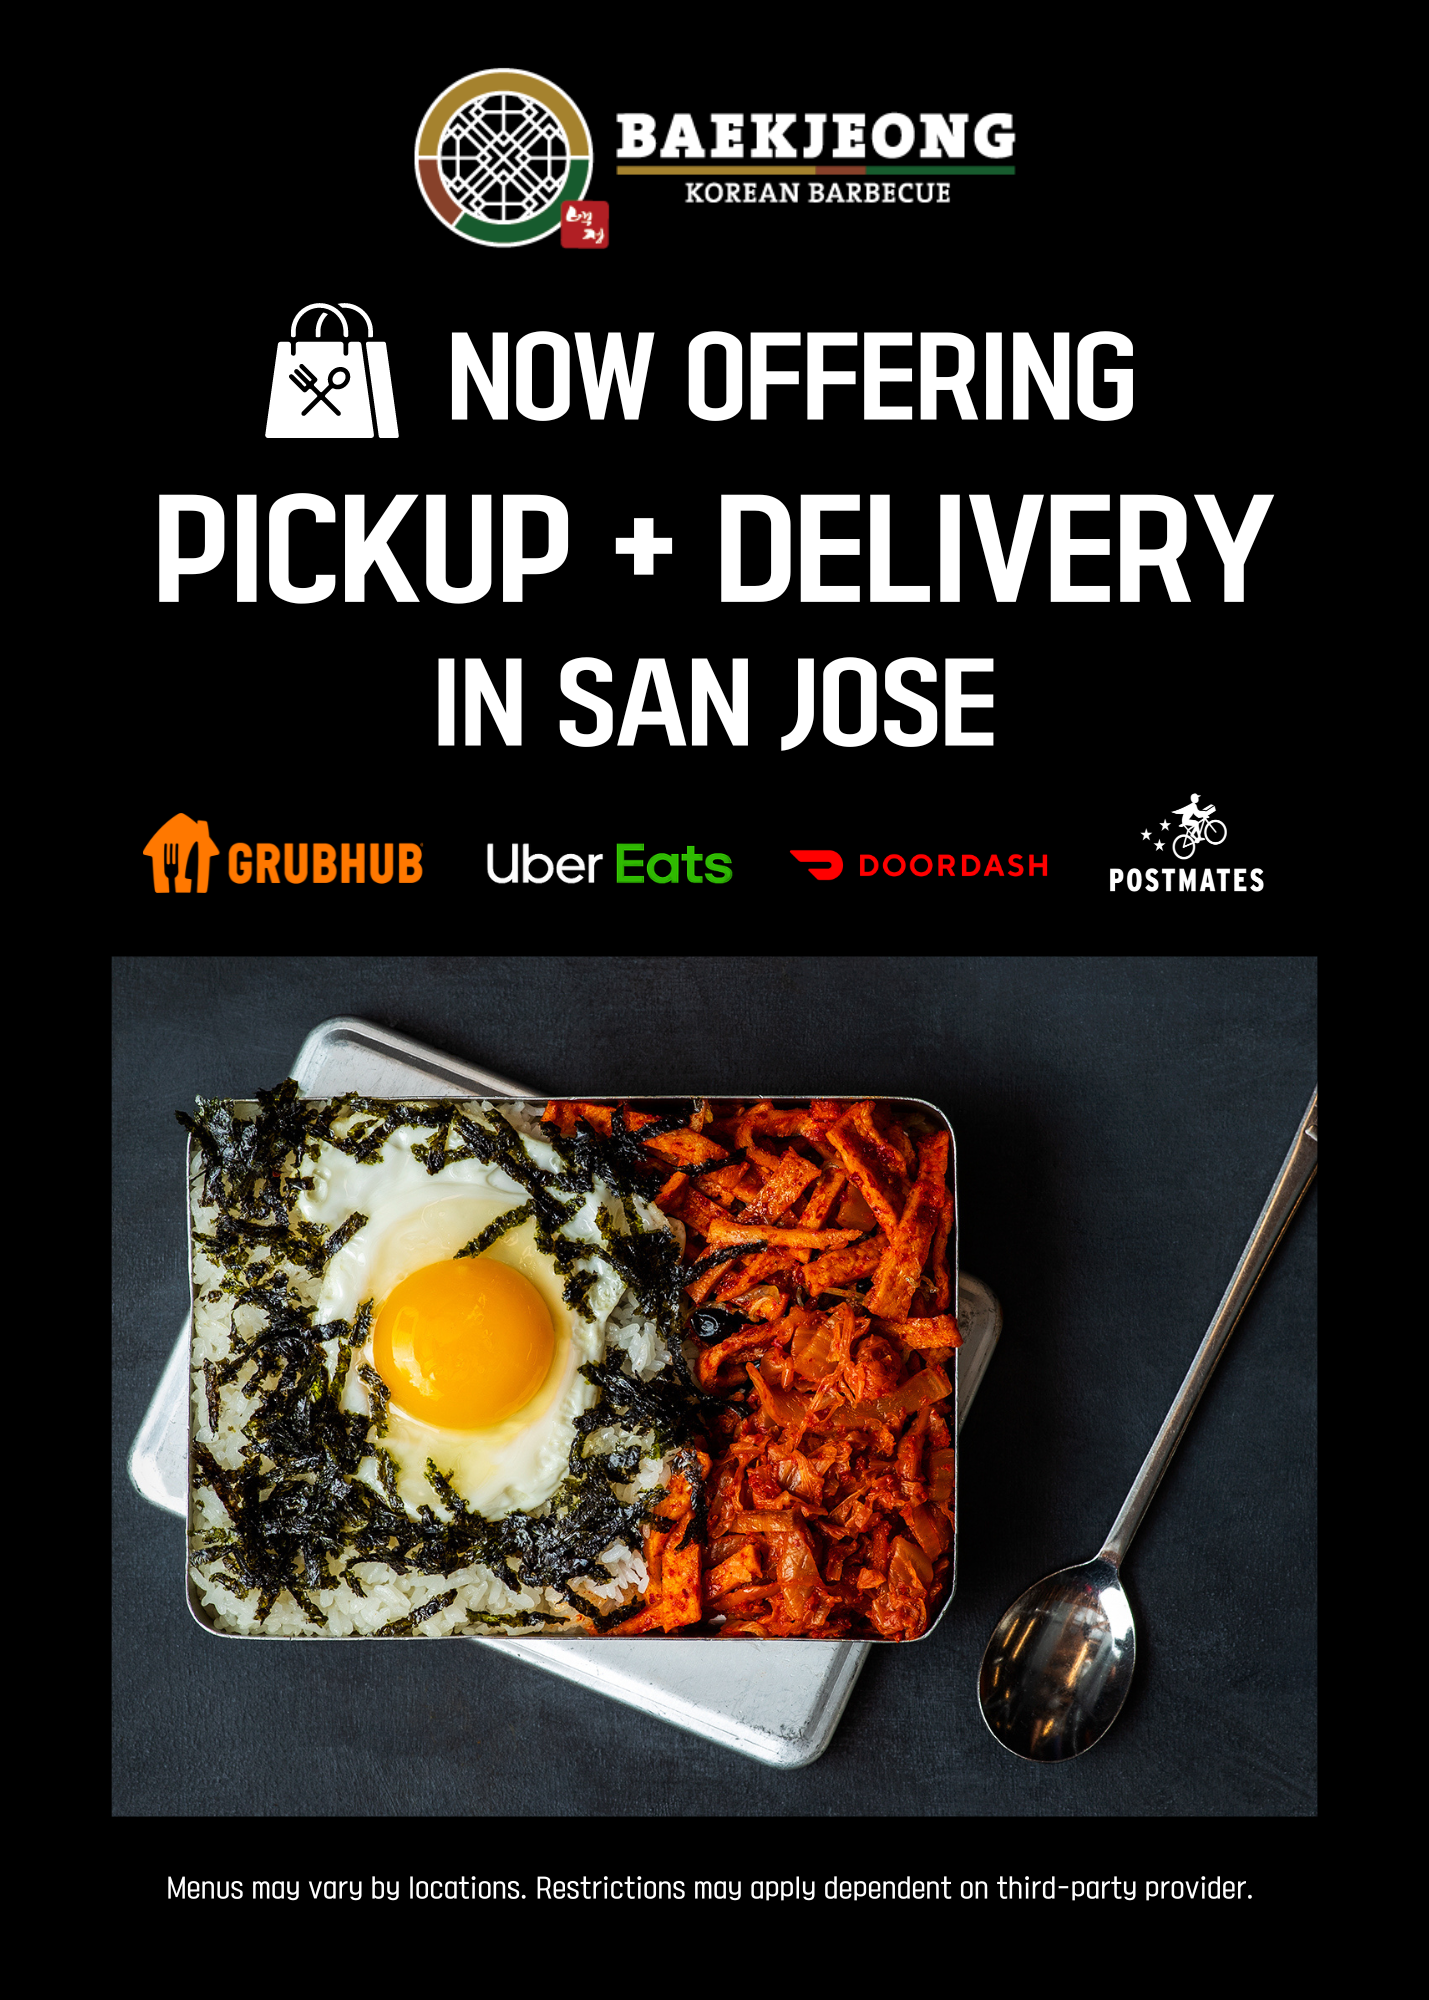 Now offering pickup + delivery in San Jose: Grubhub, Uber Eats, Dooradsh, Postmates. Menus may vary by locations. Restrictions may apply dependent on third-party provider